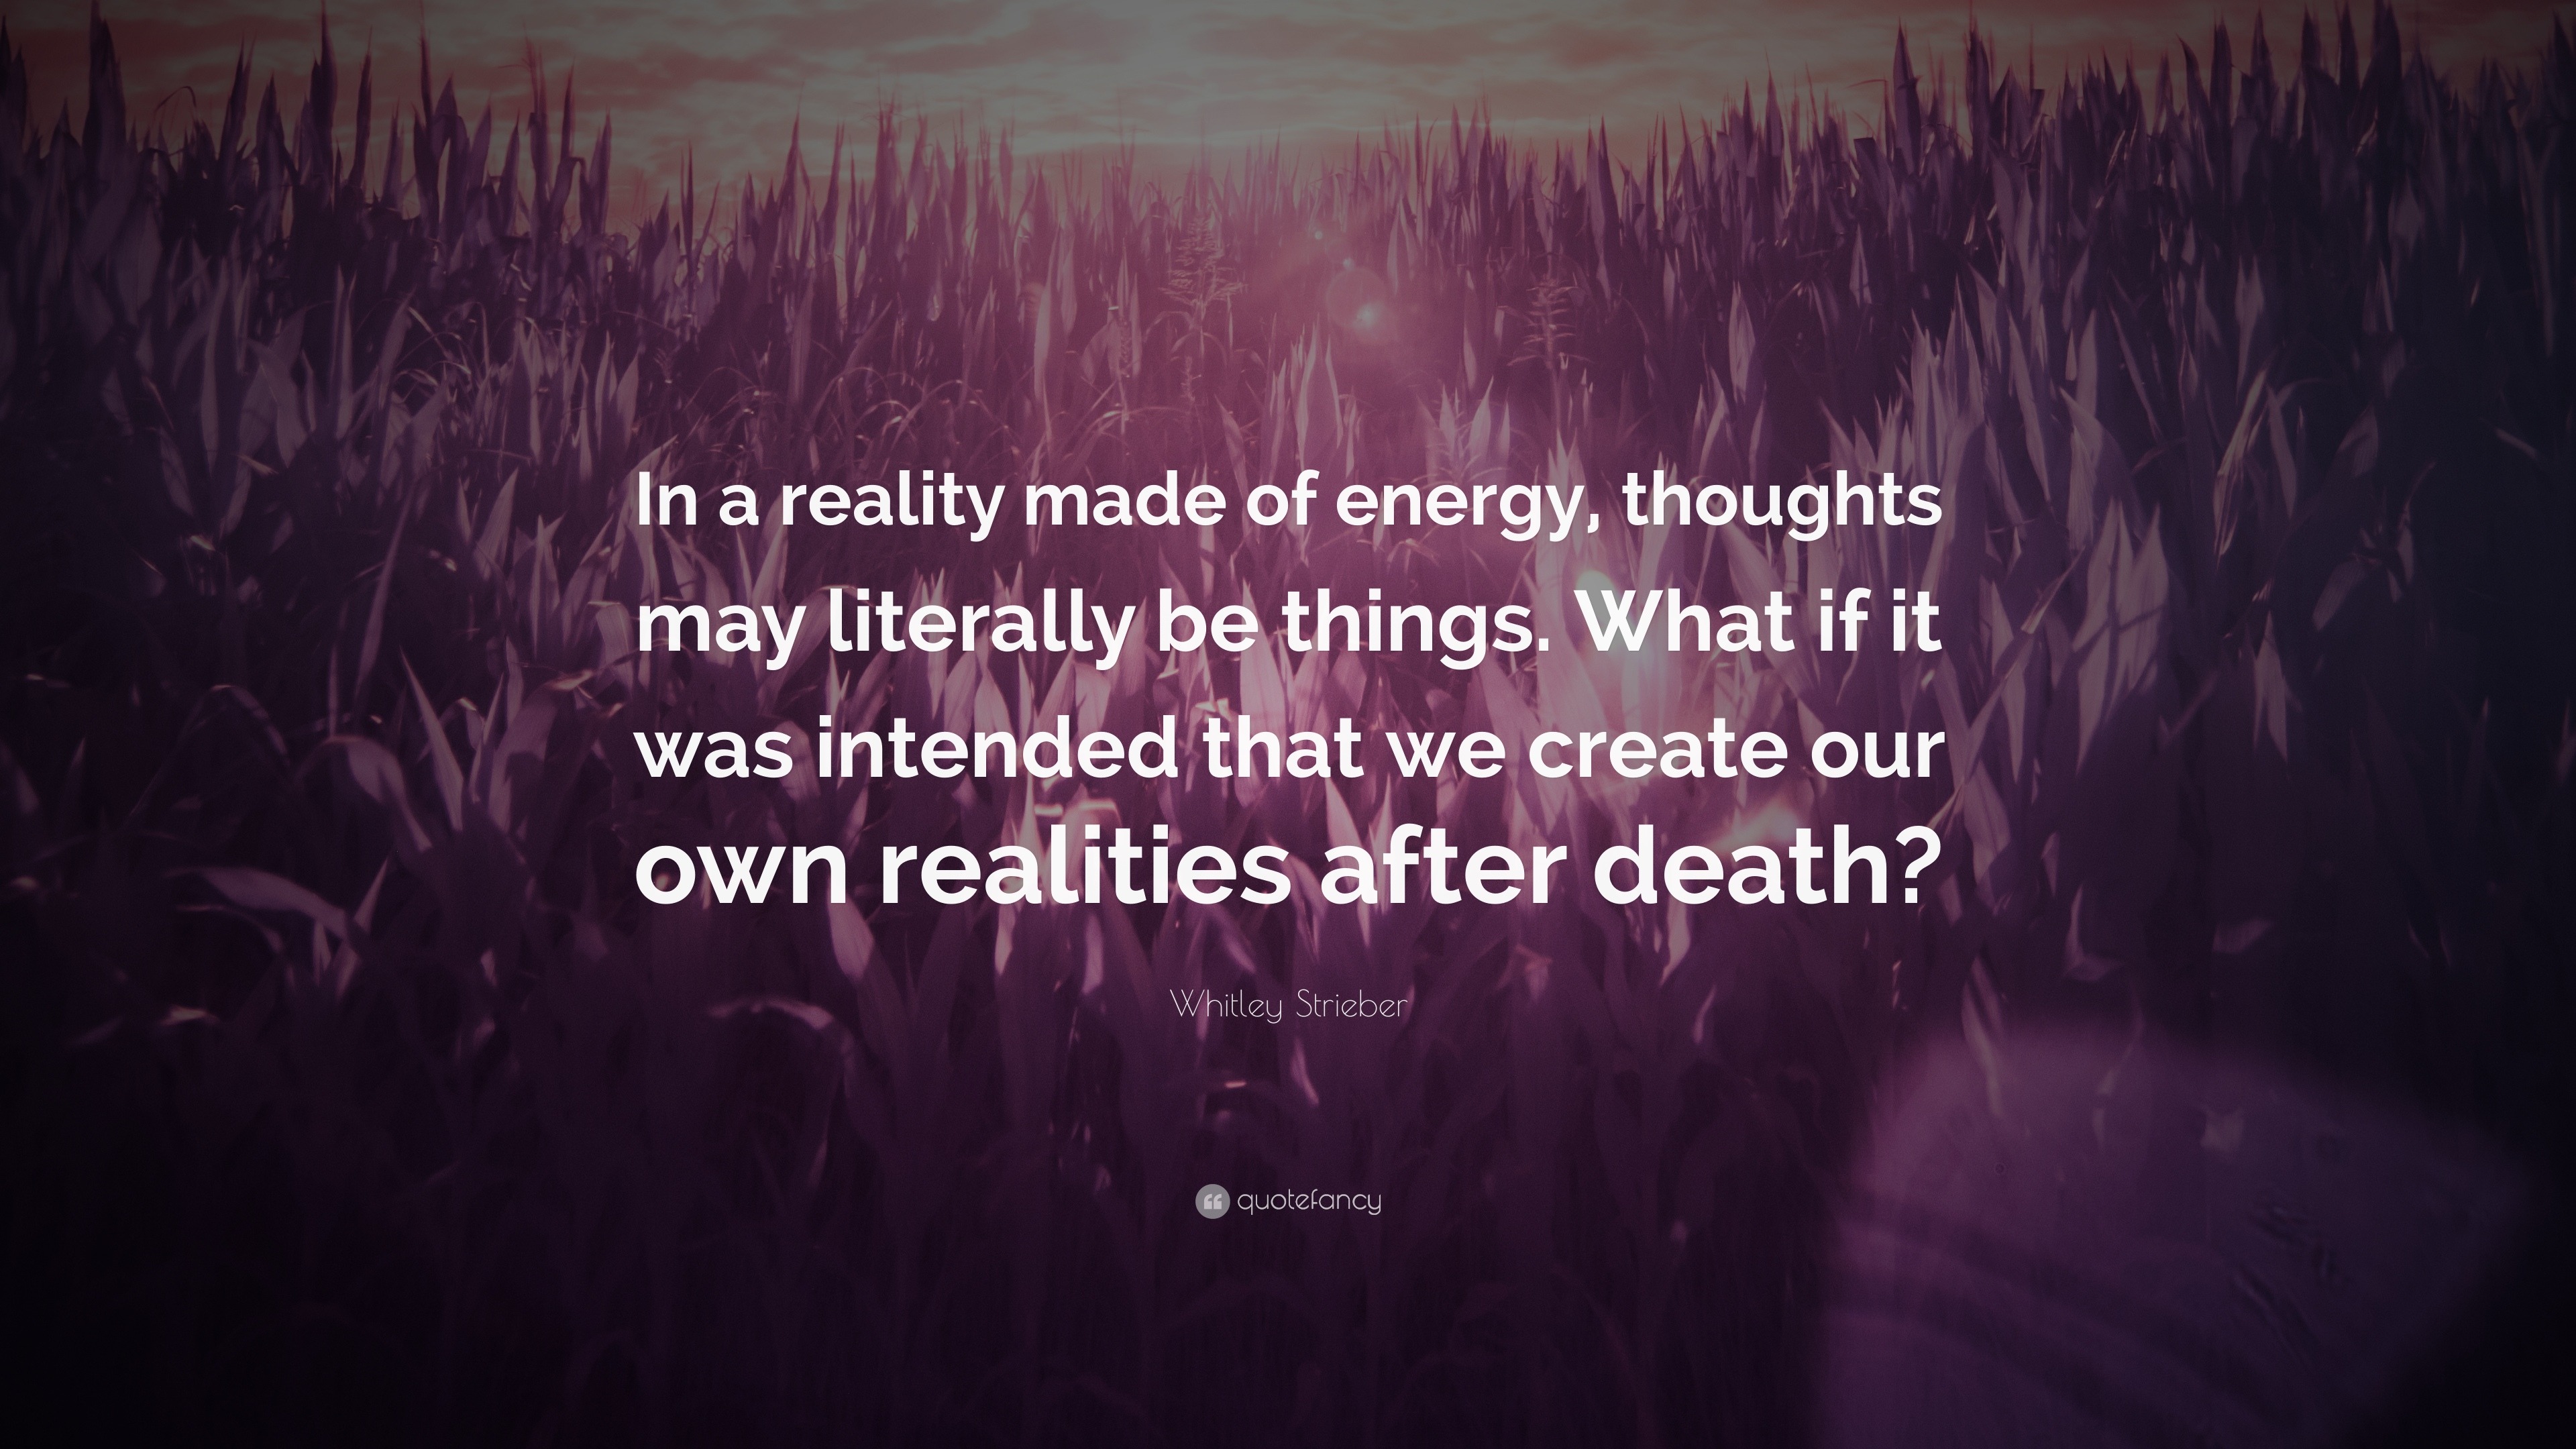 Whitley Strieber Quote: “In A Reality Made Of Energy, Thoughts May Literally Be Things. What If It Was Intended That We Create Our Own Realities ...”